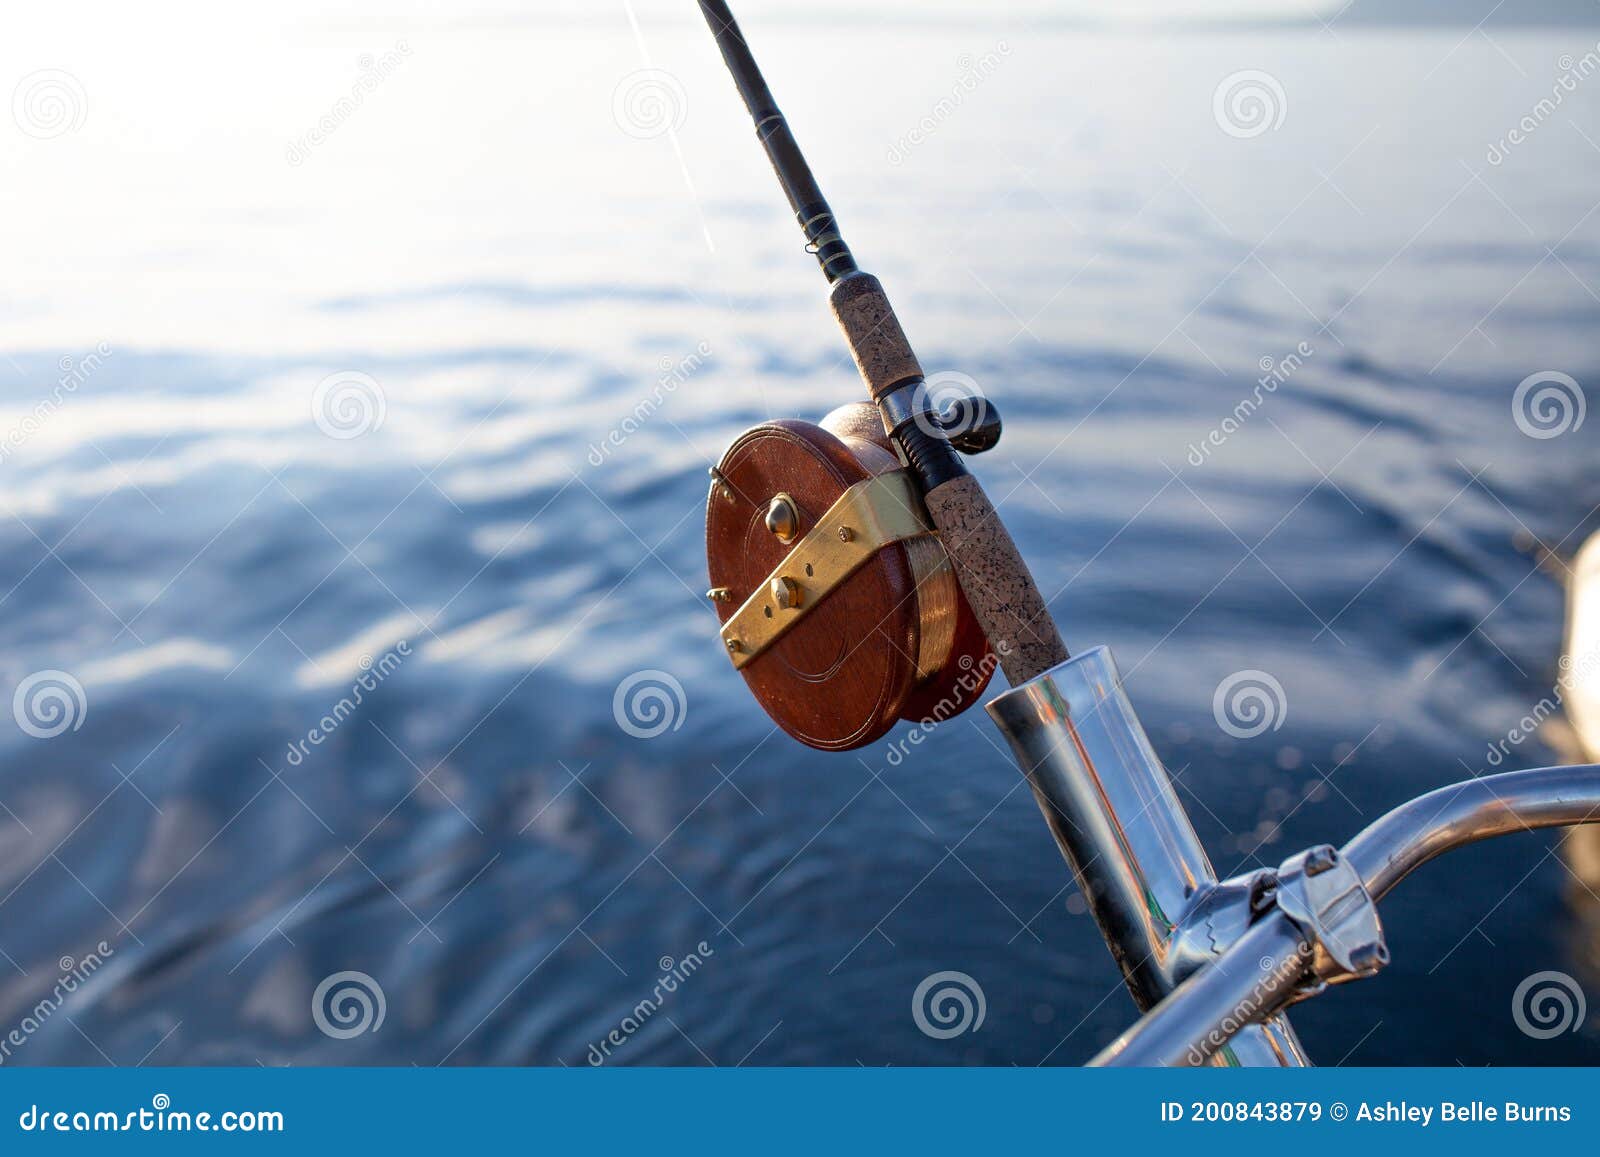 A Close Up of a Wooden Mooching Reel on a Fishing Rod Stock Image - Image  of mooching, drag: 200843879